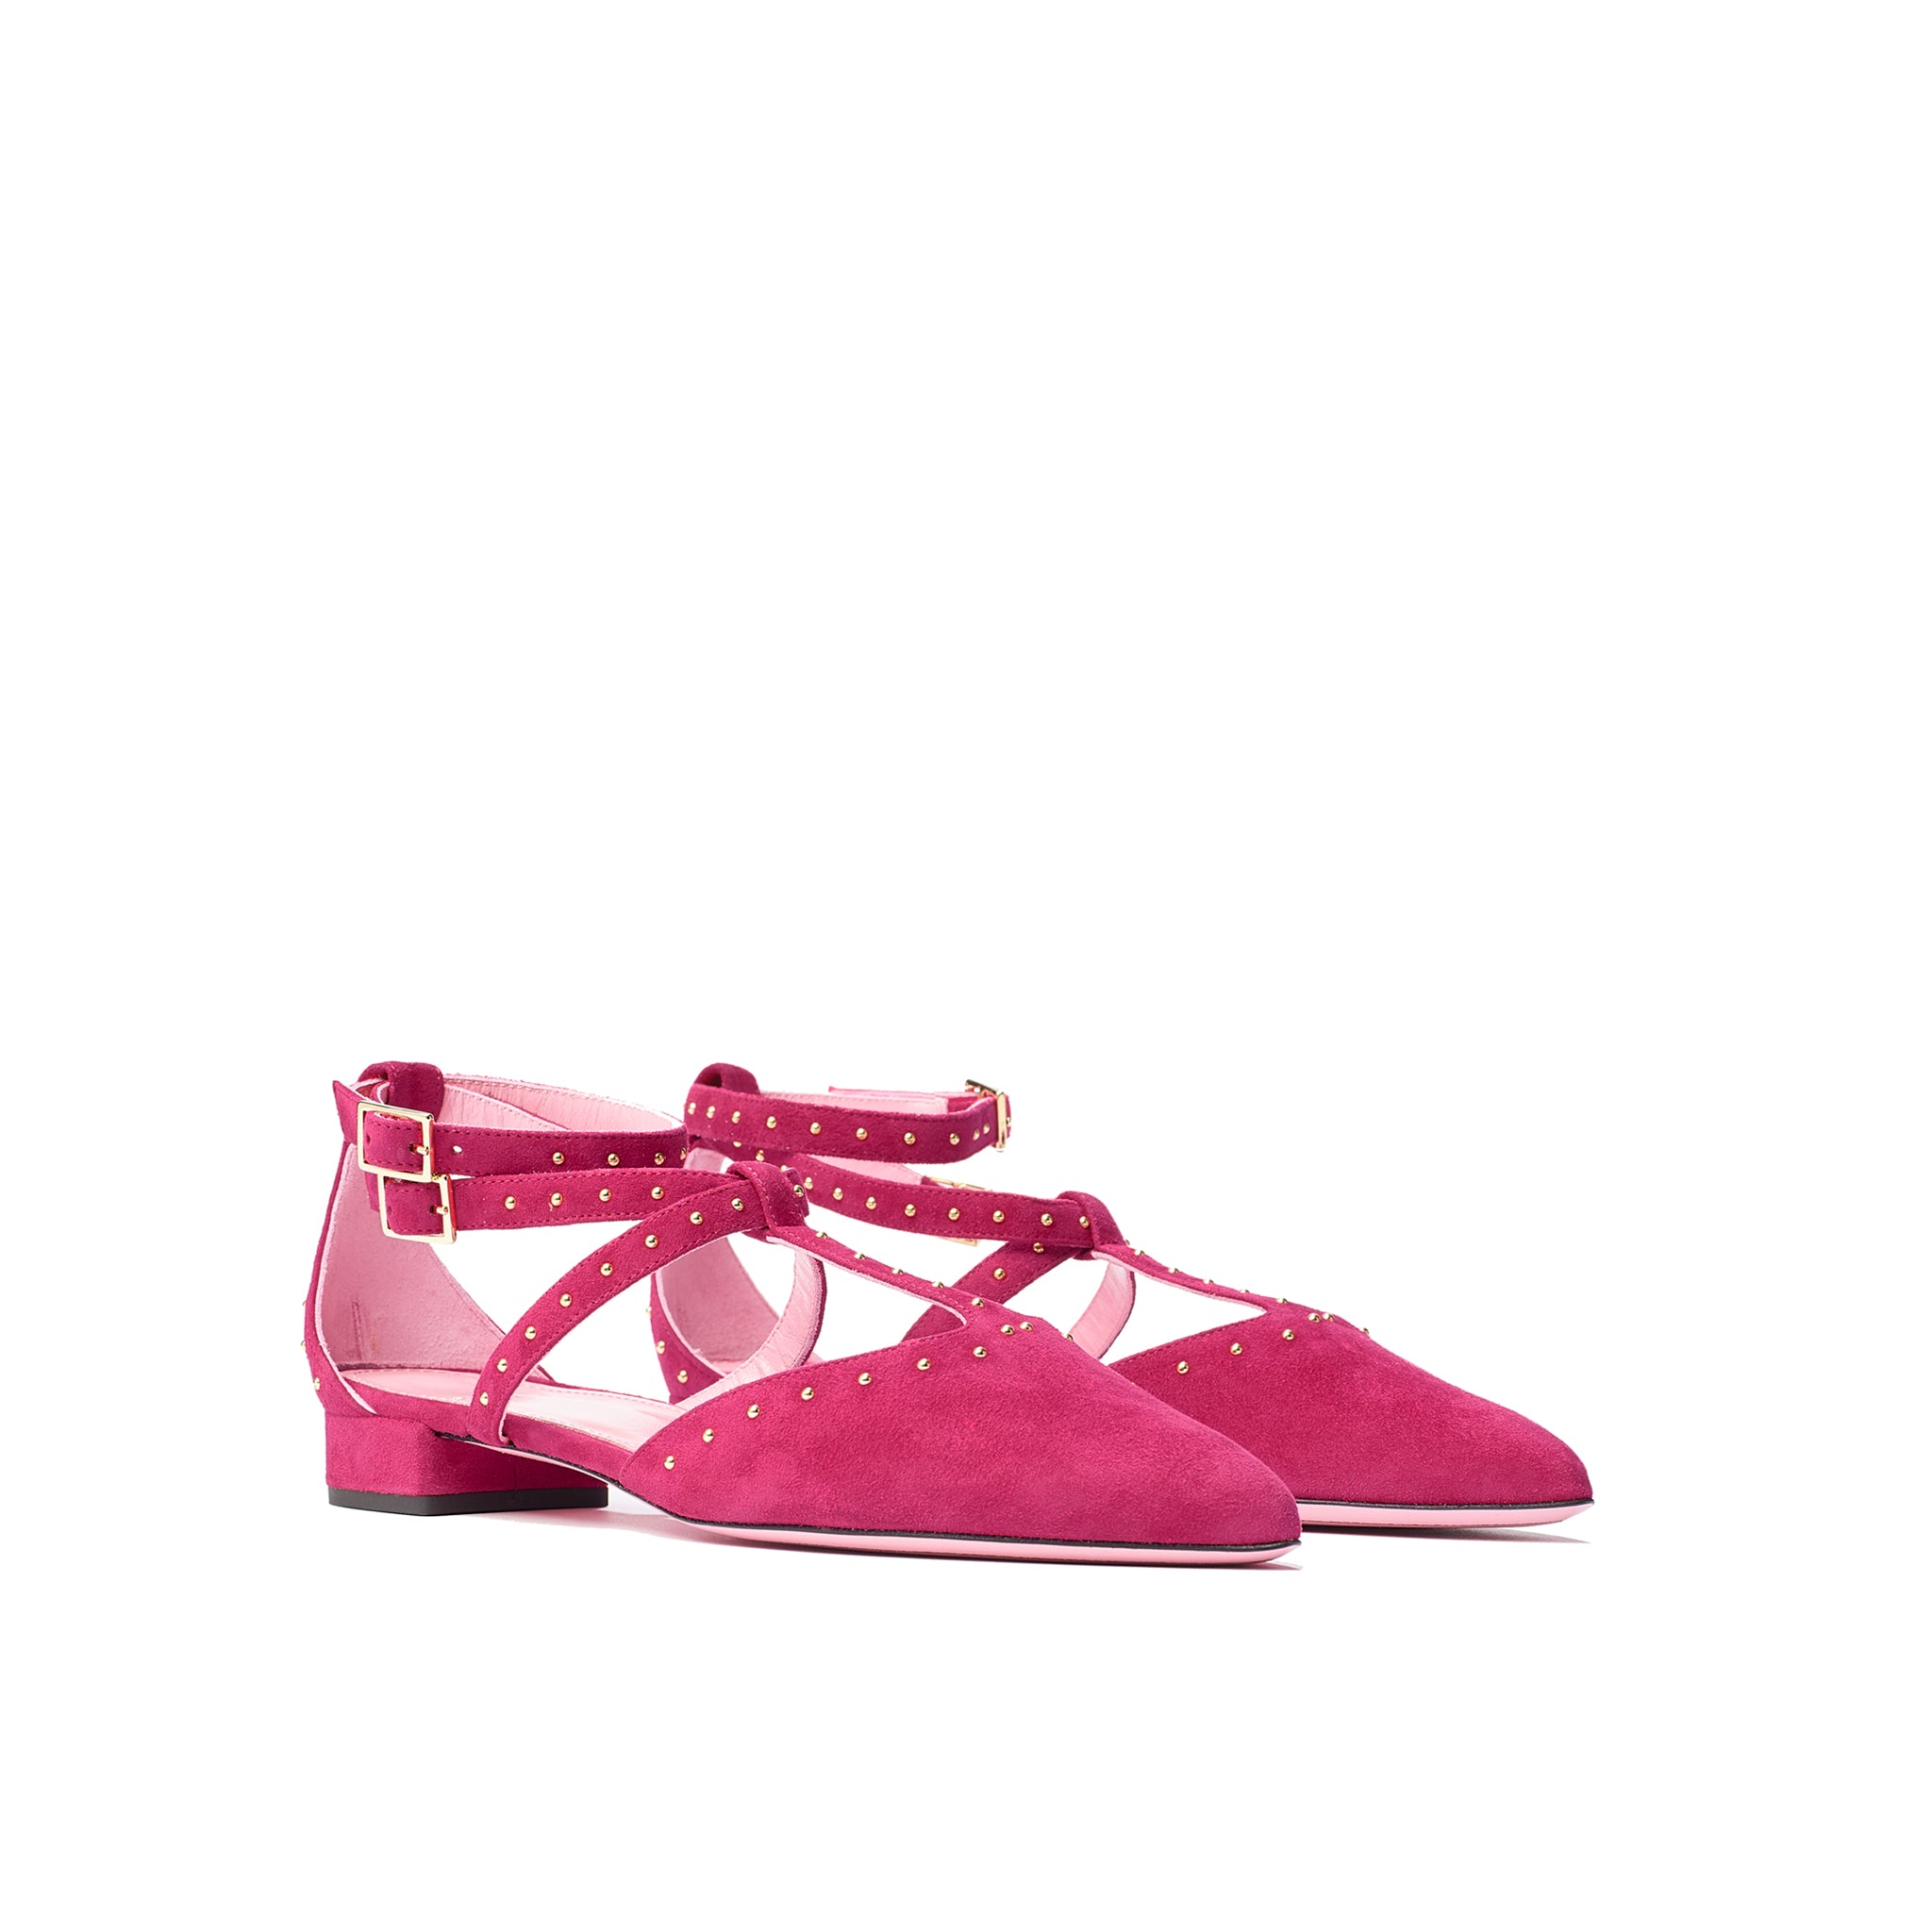 Phare Studded pointed flat in azalea suede with gold studs 3/4 view 